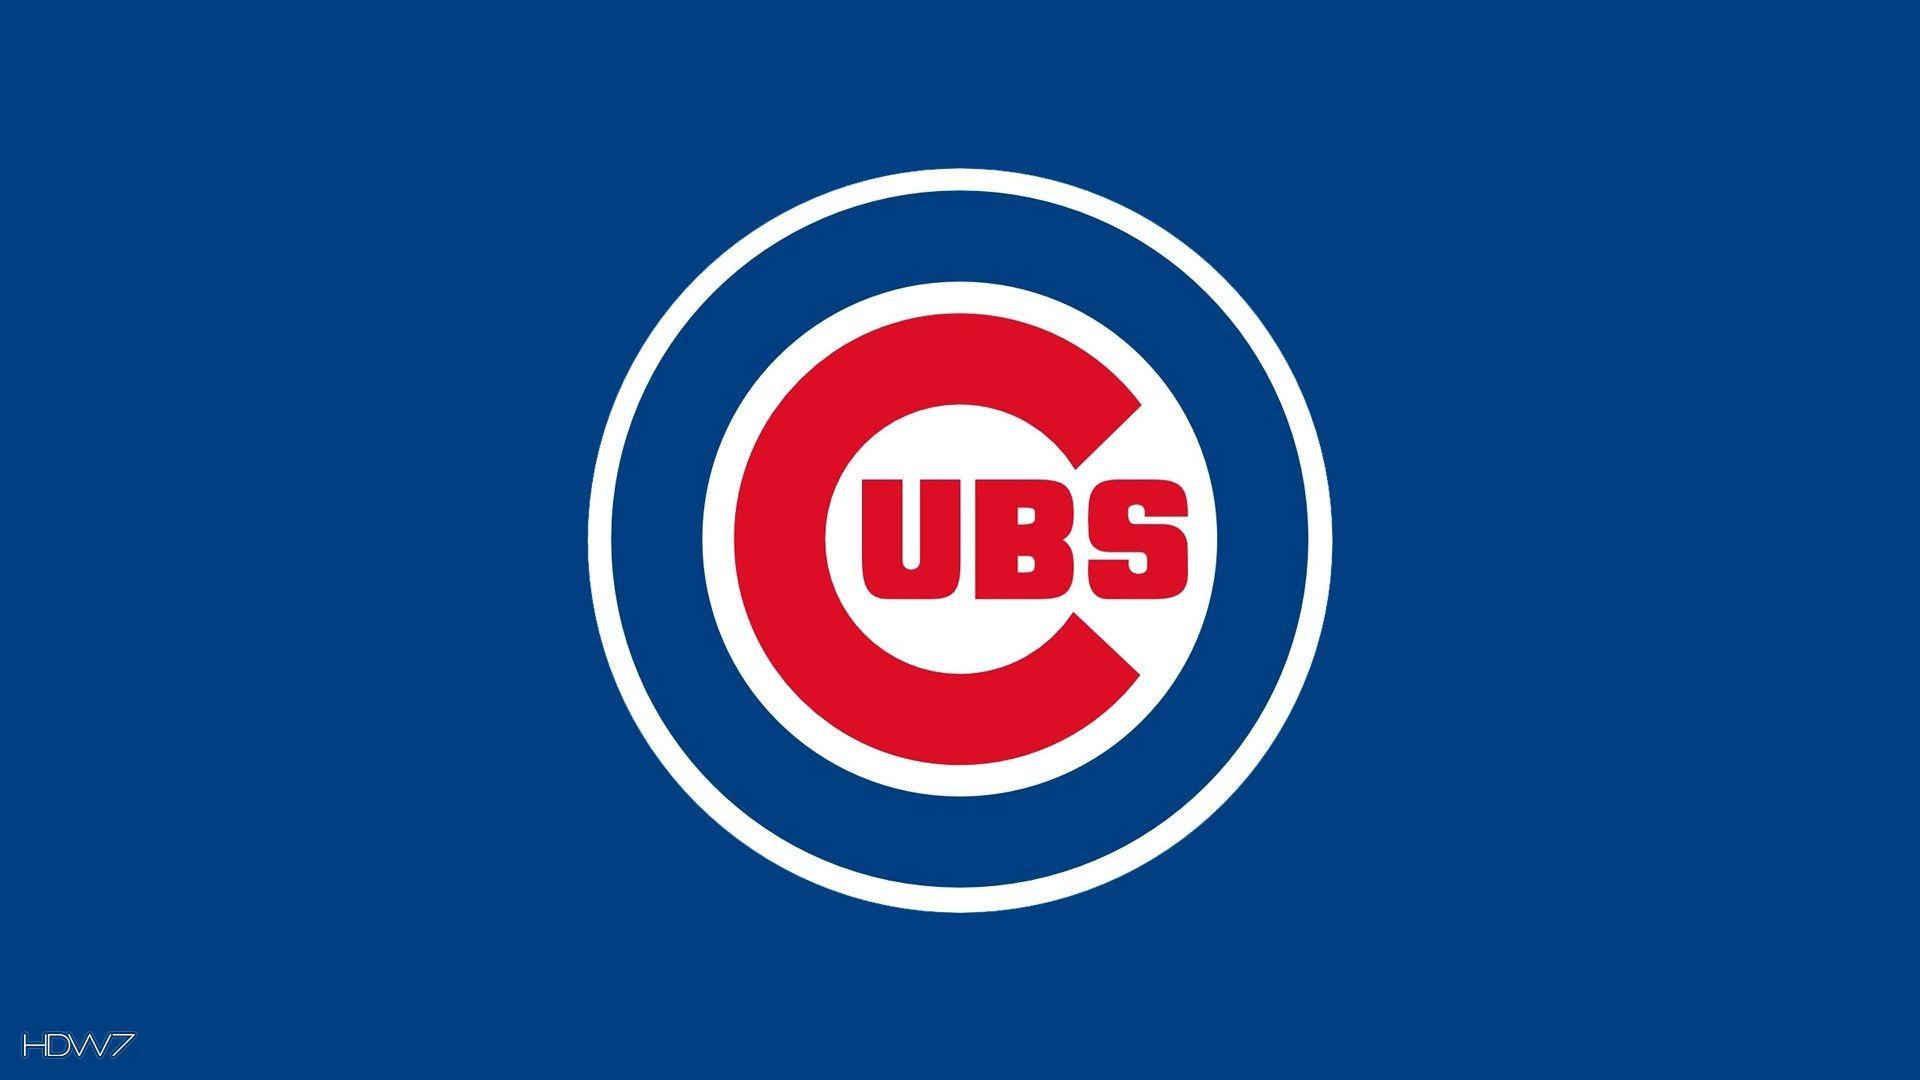 Chicago Cubs Wallpapers Top Free Chicago Cubs Backgrounds